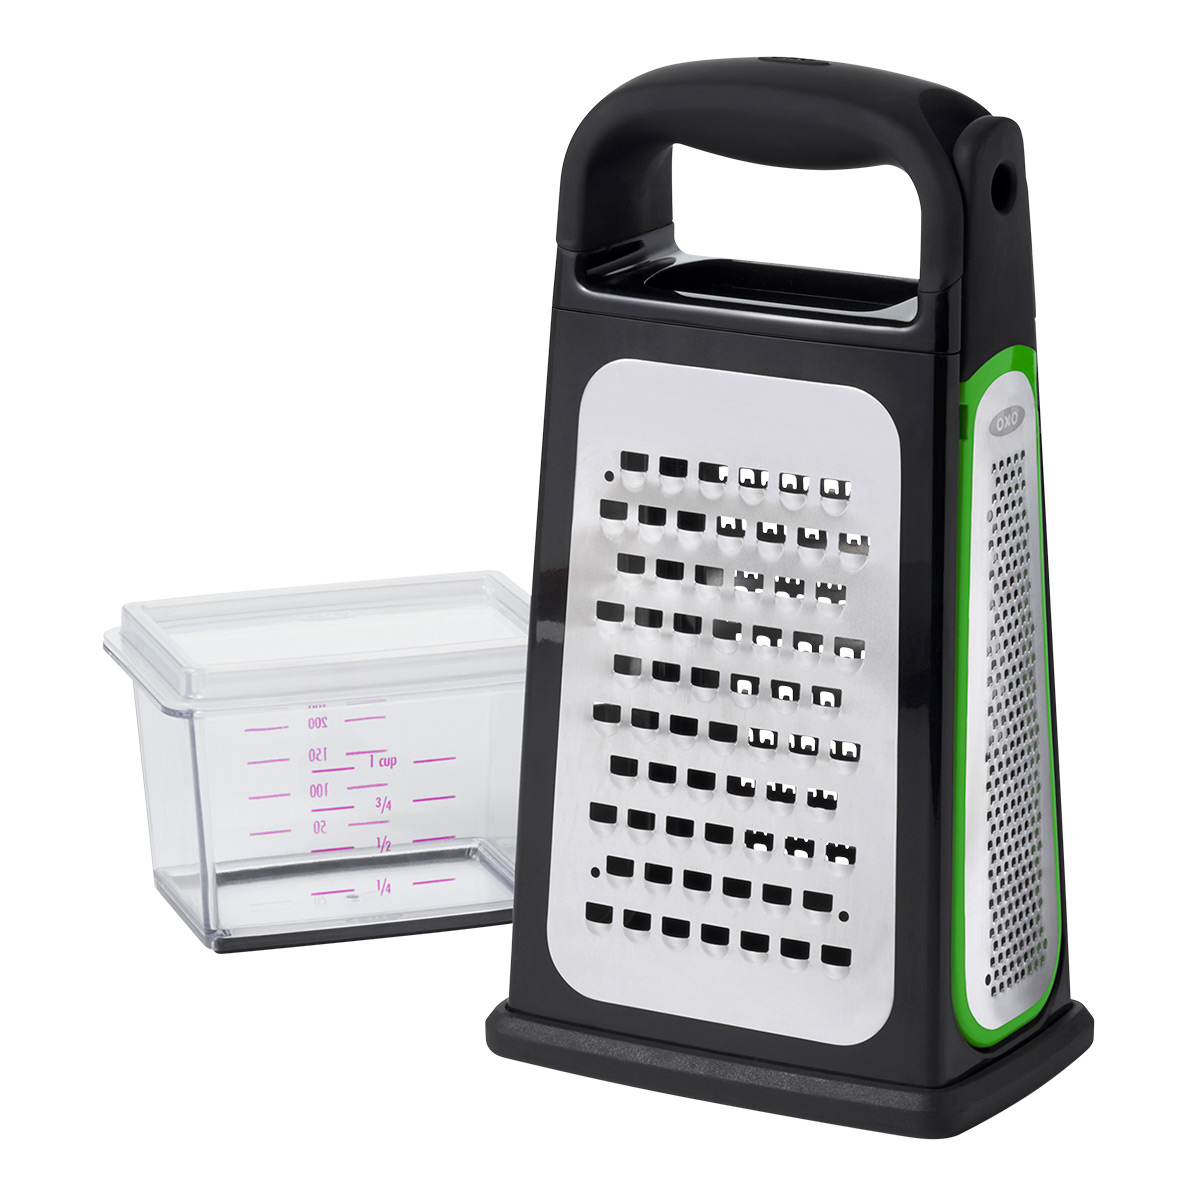 https://www.containerstore.com/catalogimages/427811/10086166-OXO-Box-Grater-VEN2.jpg